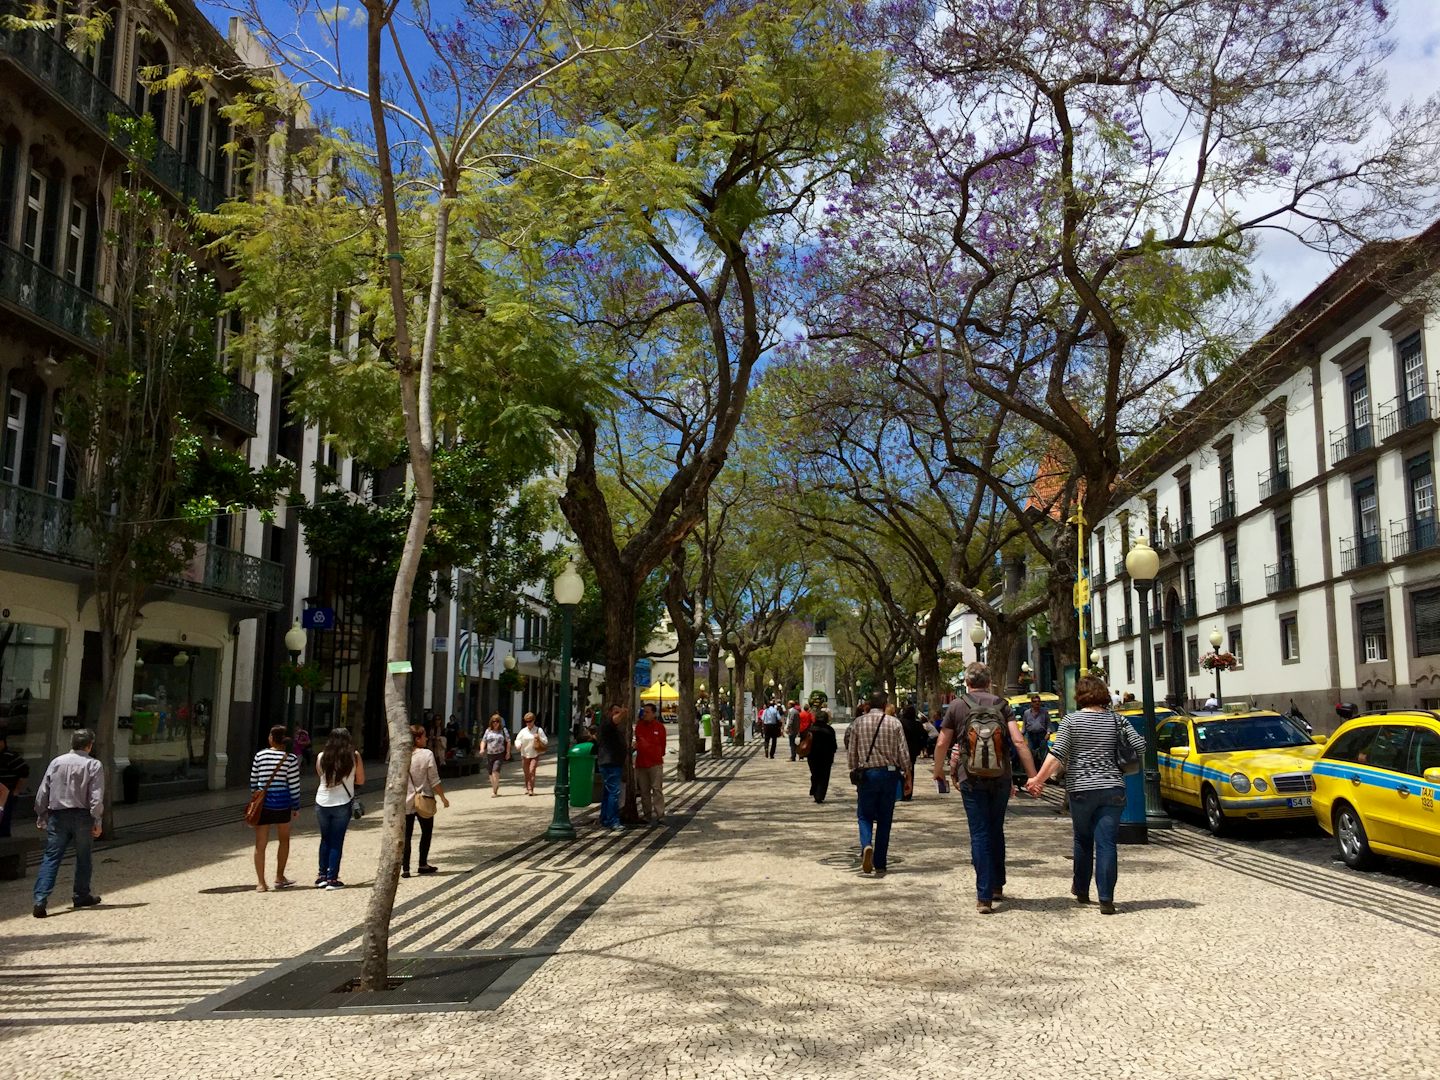 downtown Madeira is worth the visit.